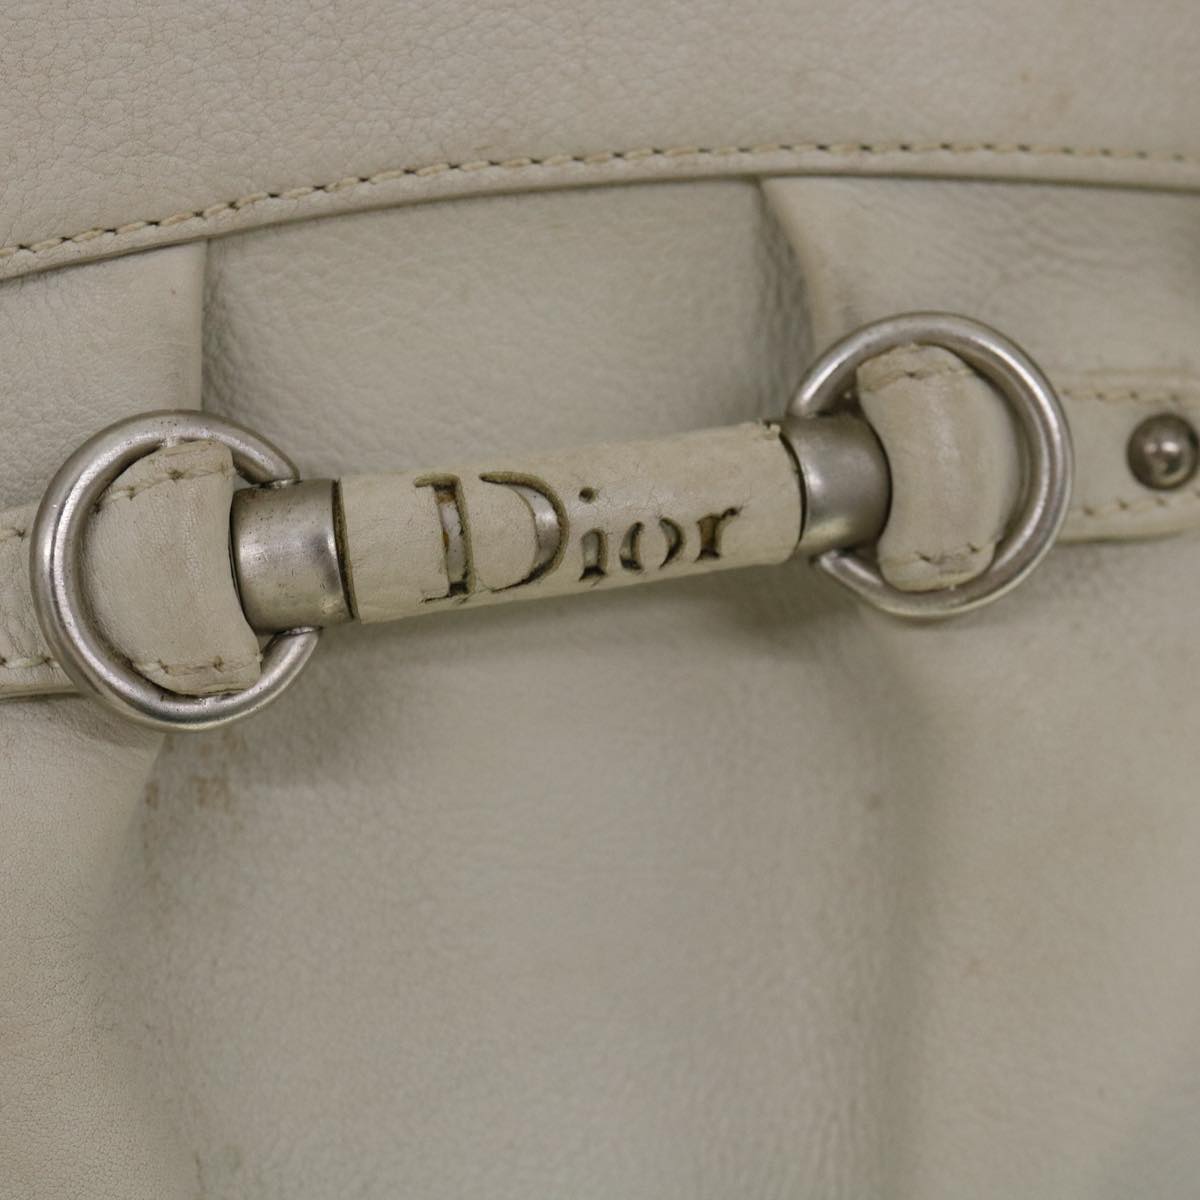 Christian Dior Shoulder Bag Leather White Auth am2766g